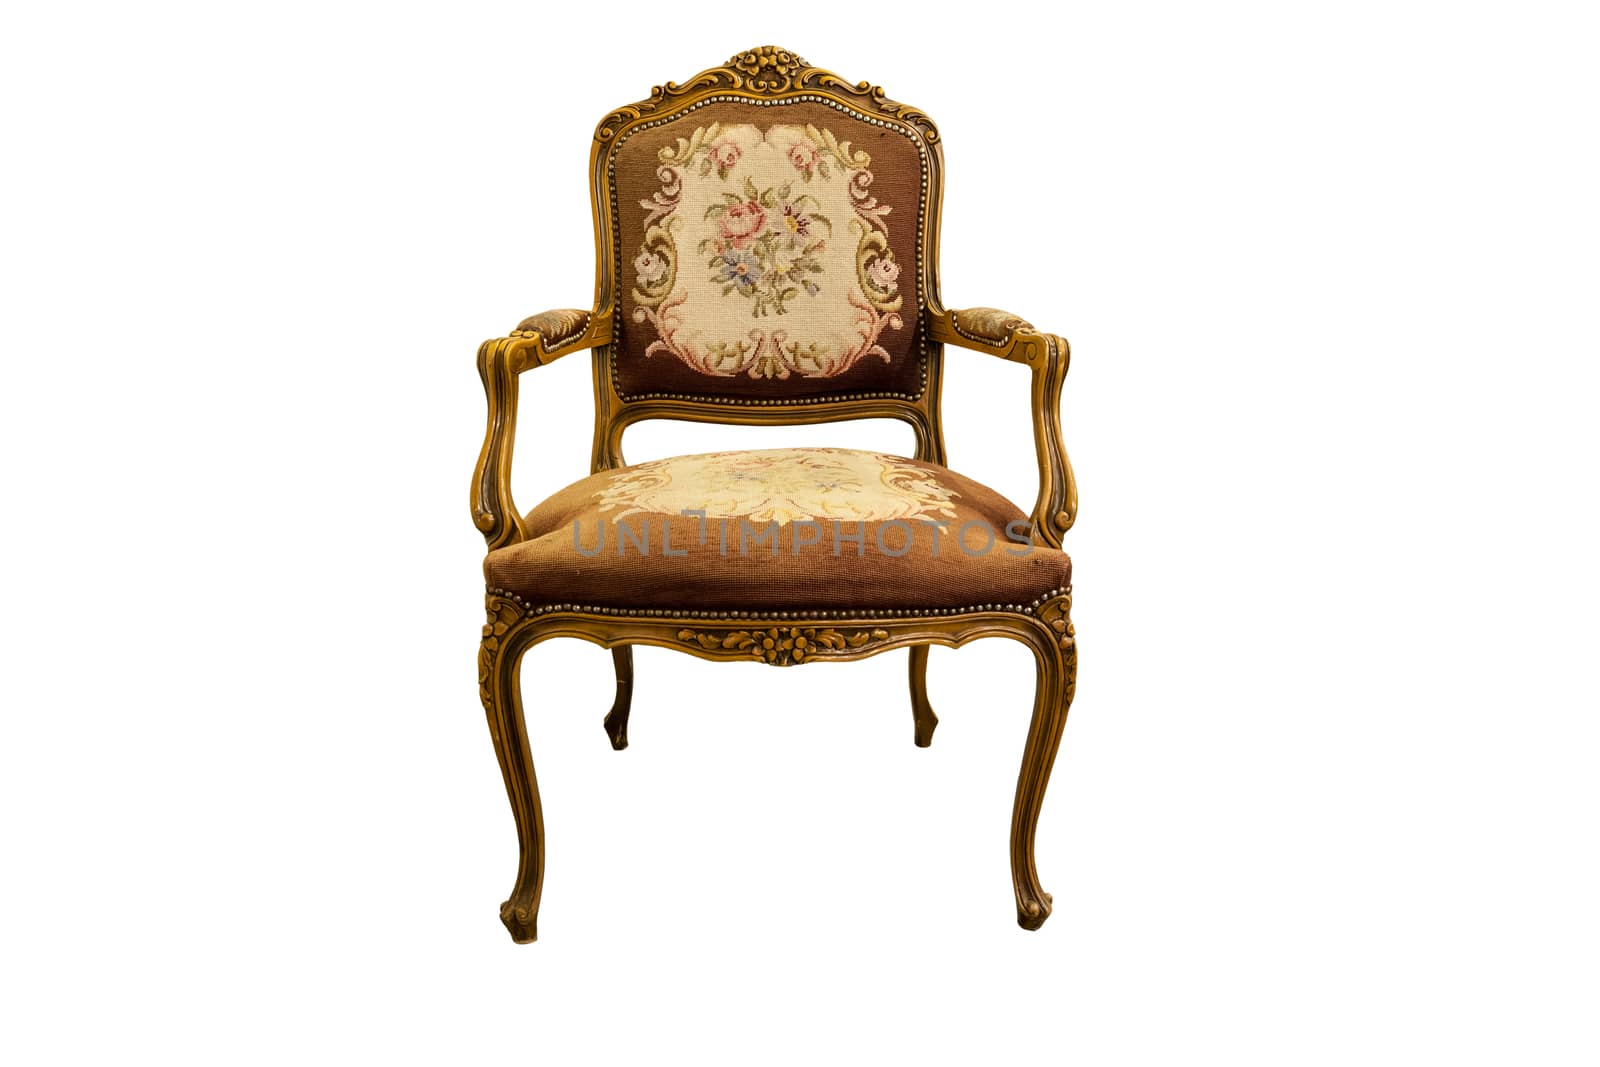 French XIX century antique chair made from oak wood isolated on white.